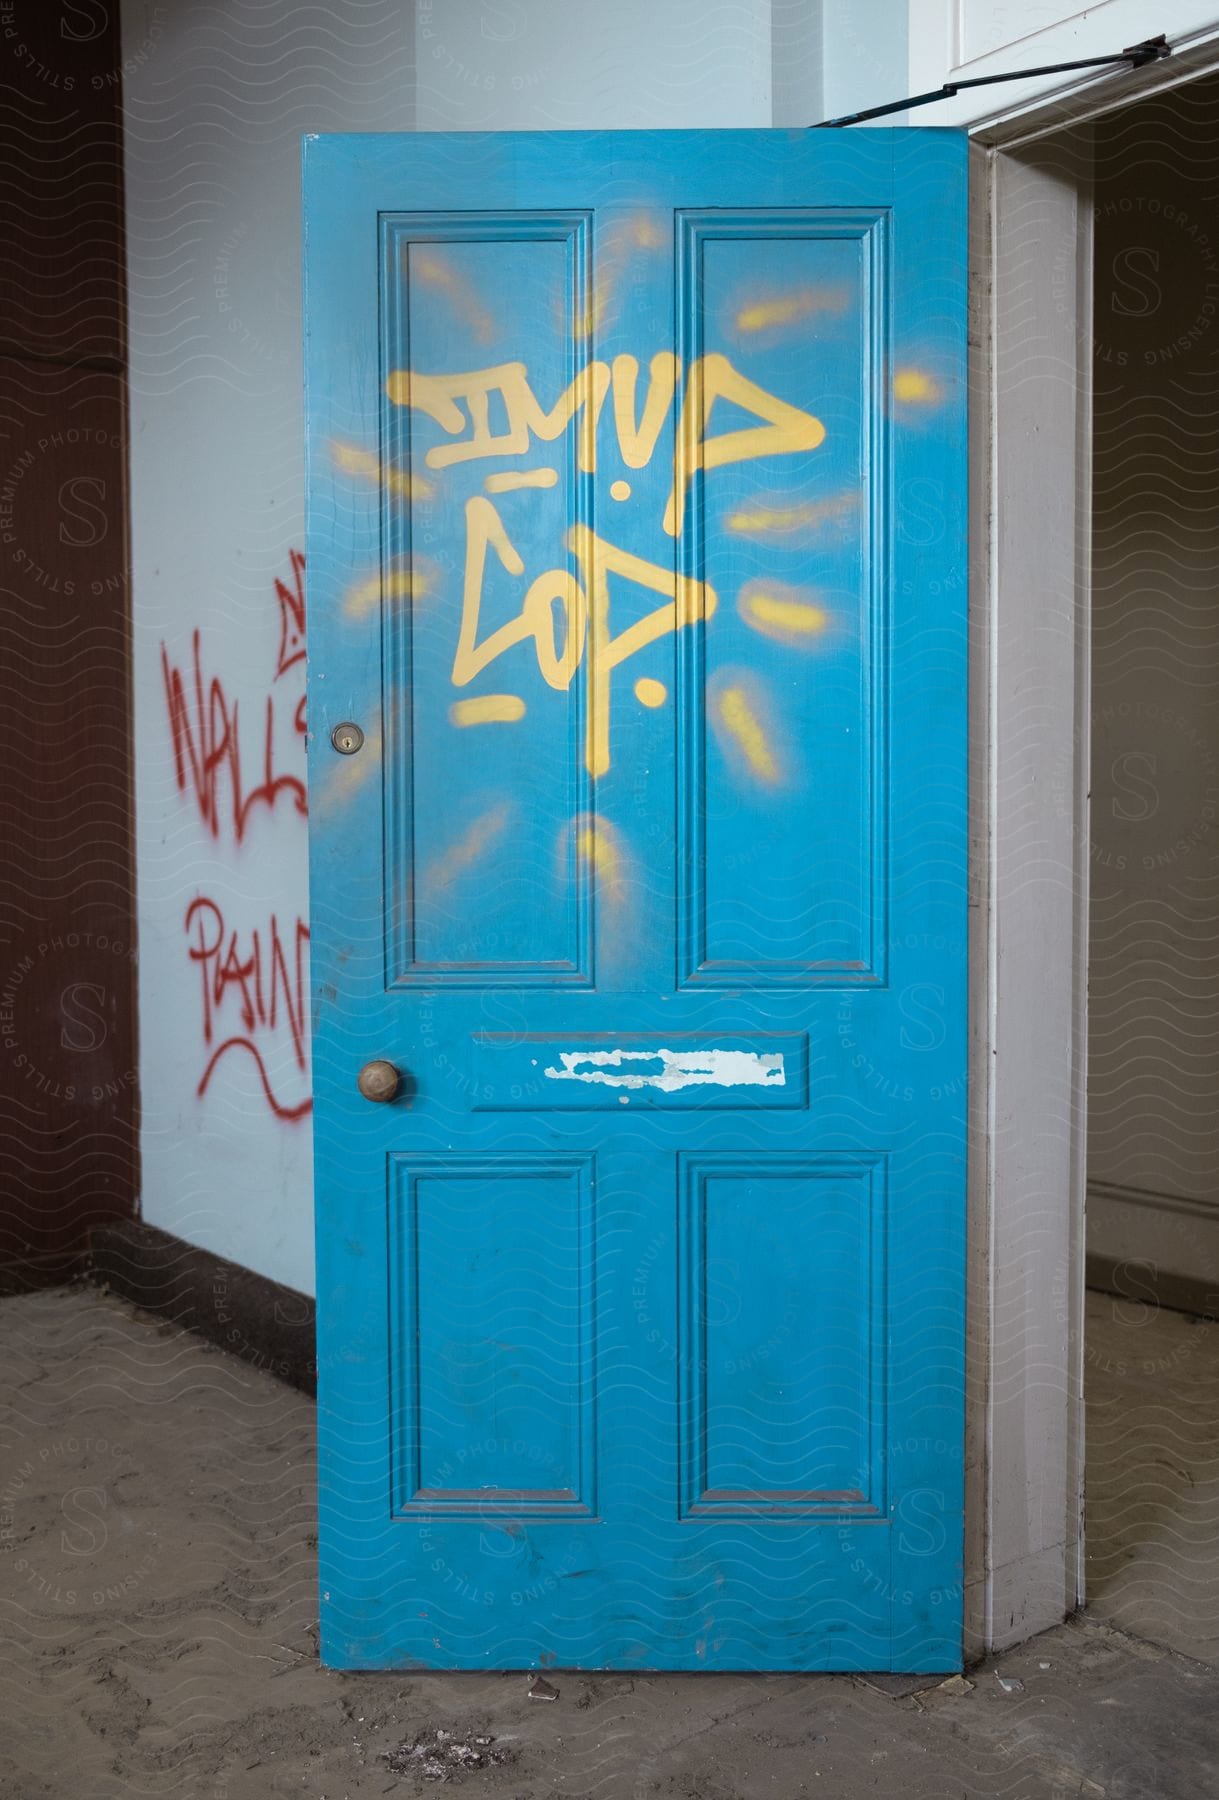 Graffiti spray painted on the door and wall of a vacant apartment